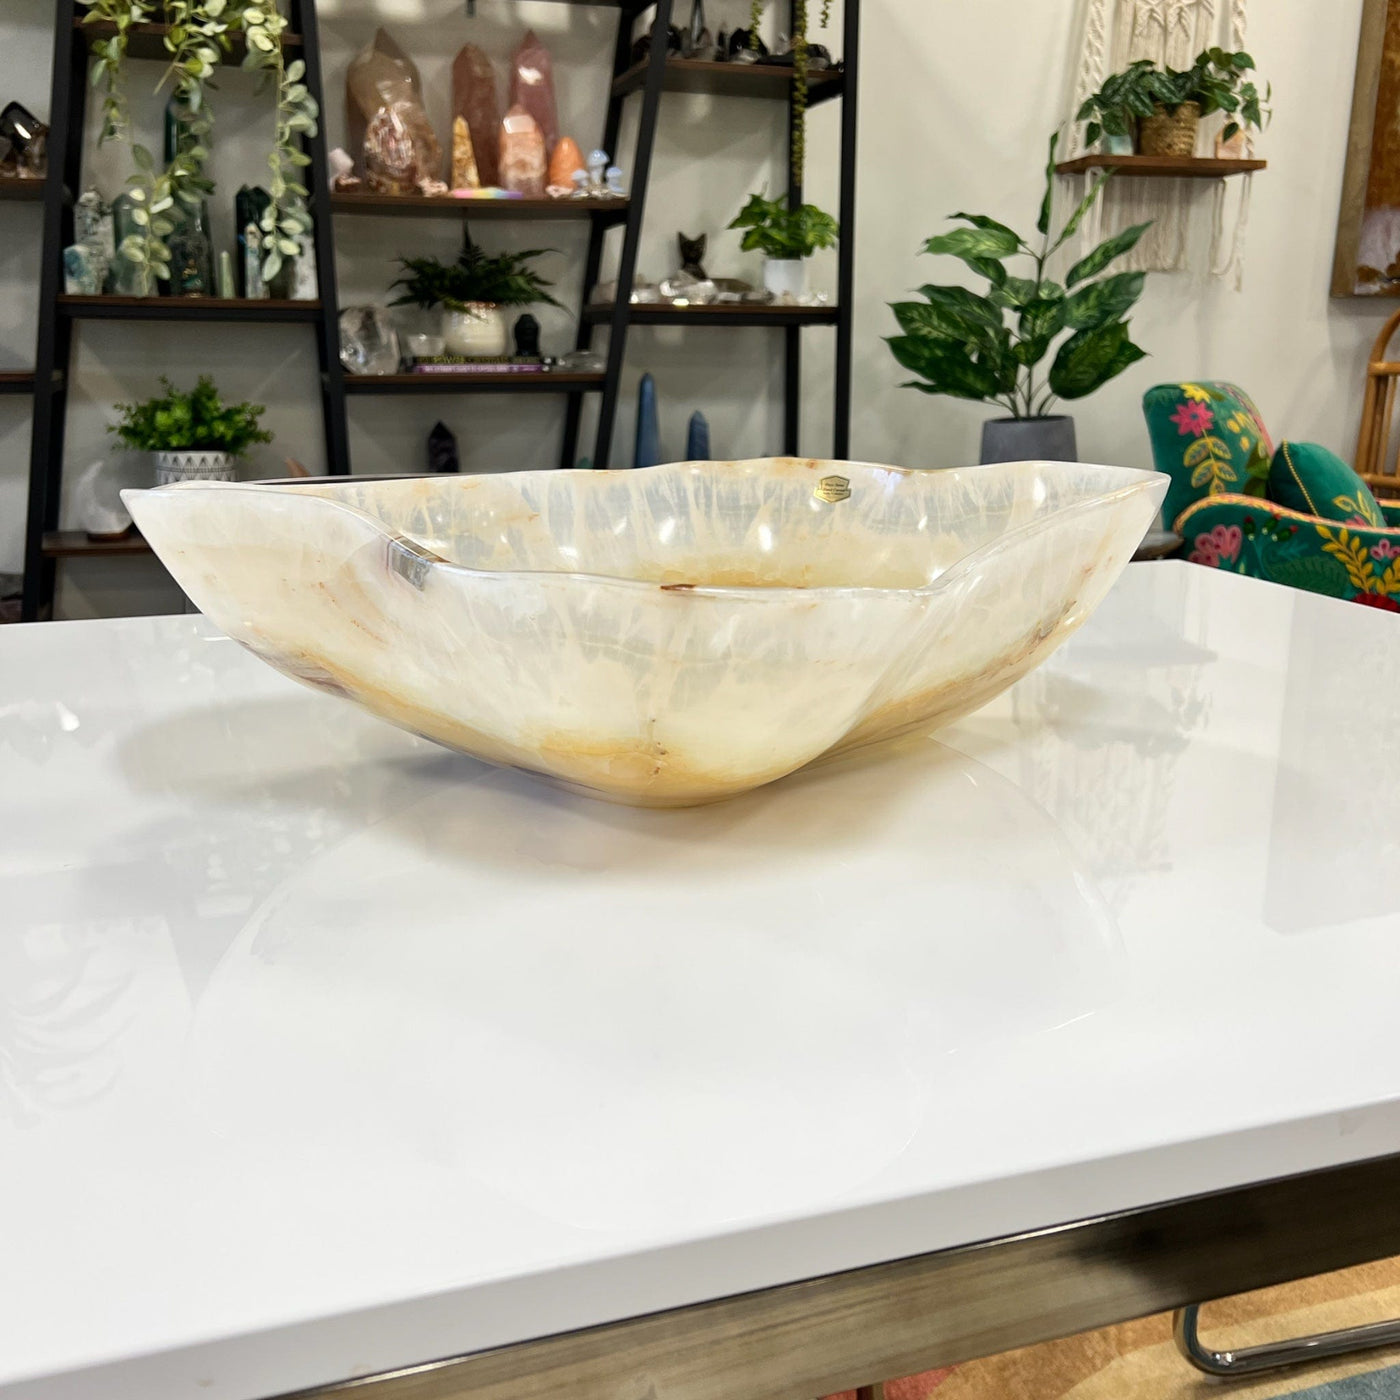 Large mexican onyx bowl displayed on a counter top. It is shades of cream, tan, and brown.